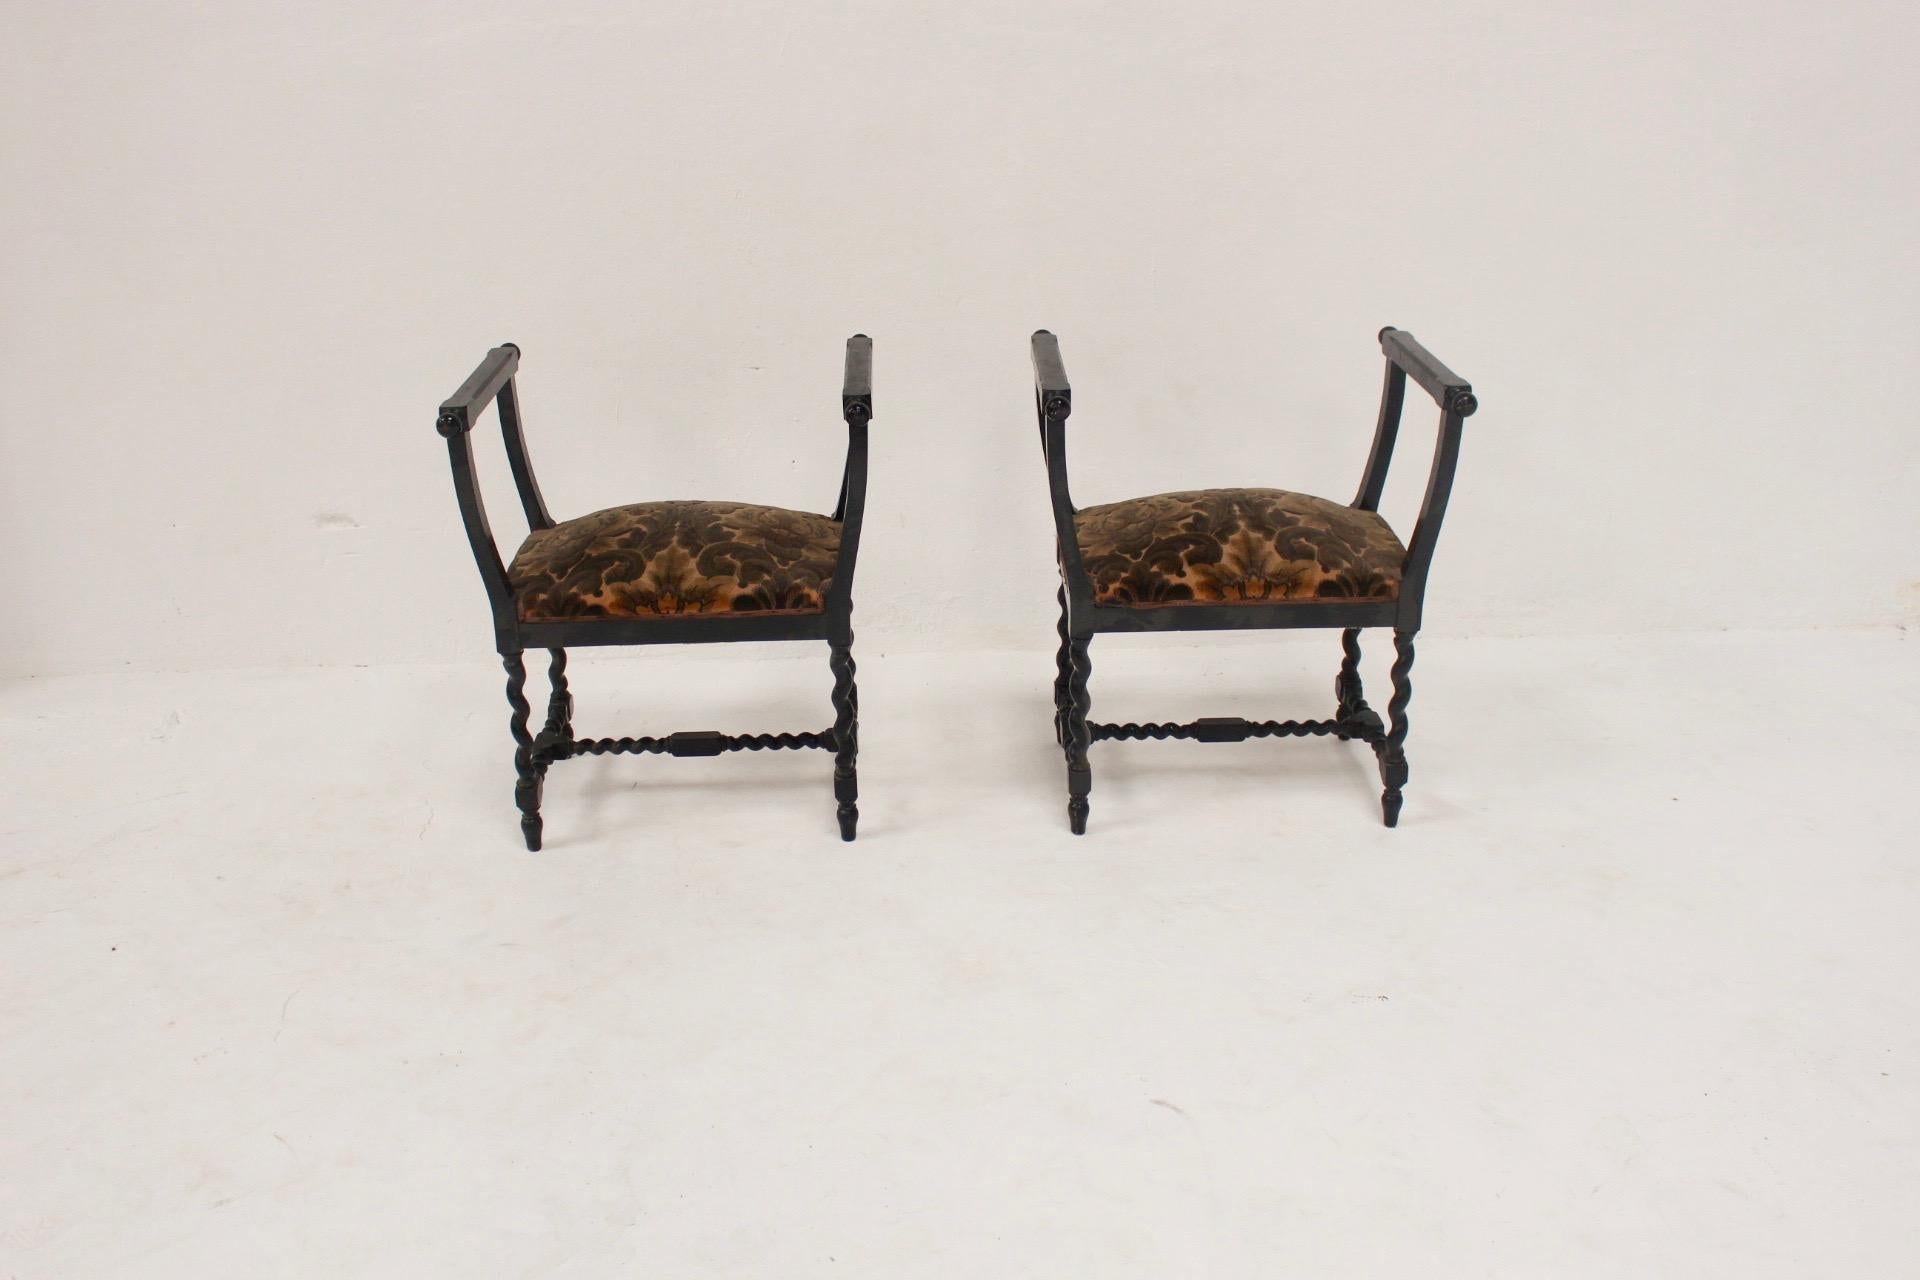 Renaissance Revival ebonised wood stools, Spain, 1930s

- Handcrafted wood, with the typical renaissance spyral legs
- Original Upholstery
- Upholstered rails from bottom has been replaced(pictured). 
- Both has been treated agains wood worm,